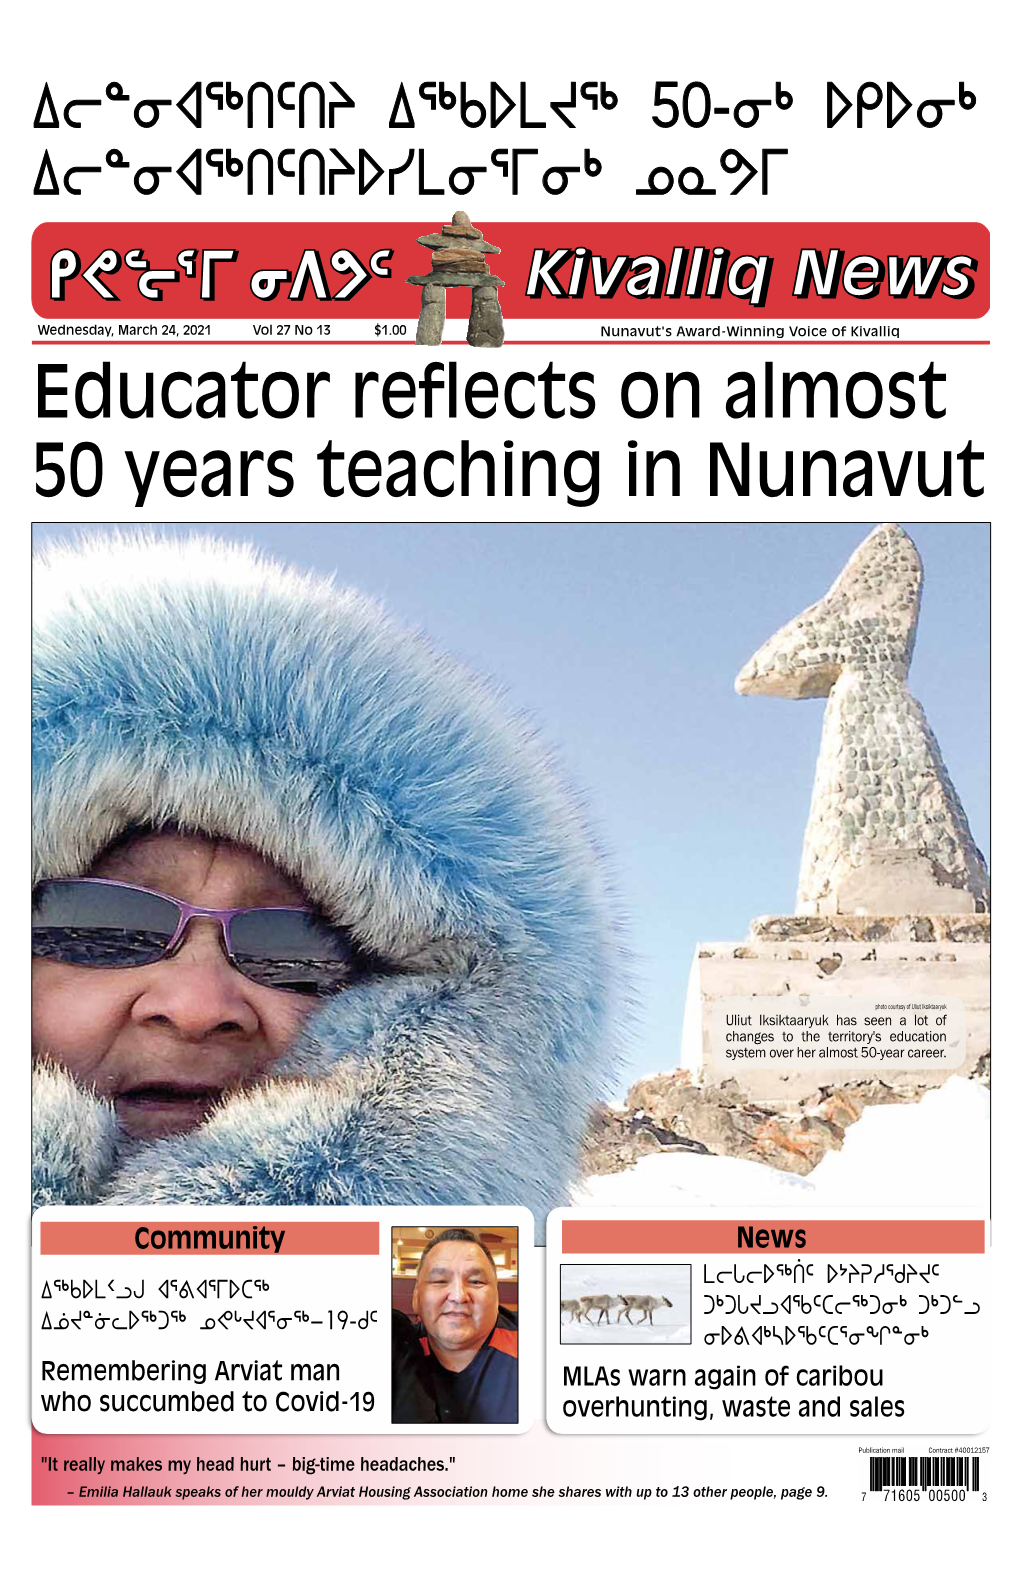 Educator Reflects on Almost 50 Years Teaching in Nunavut